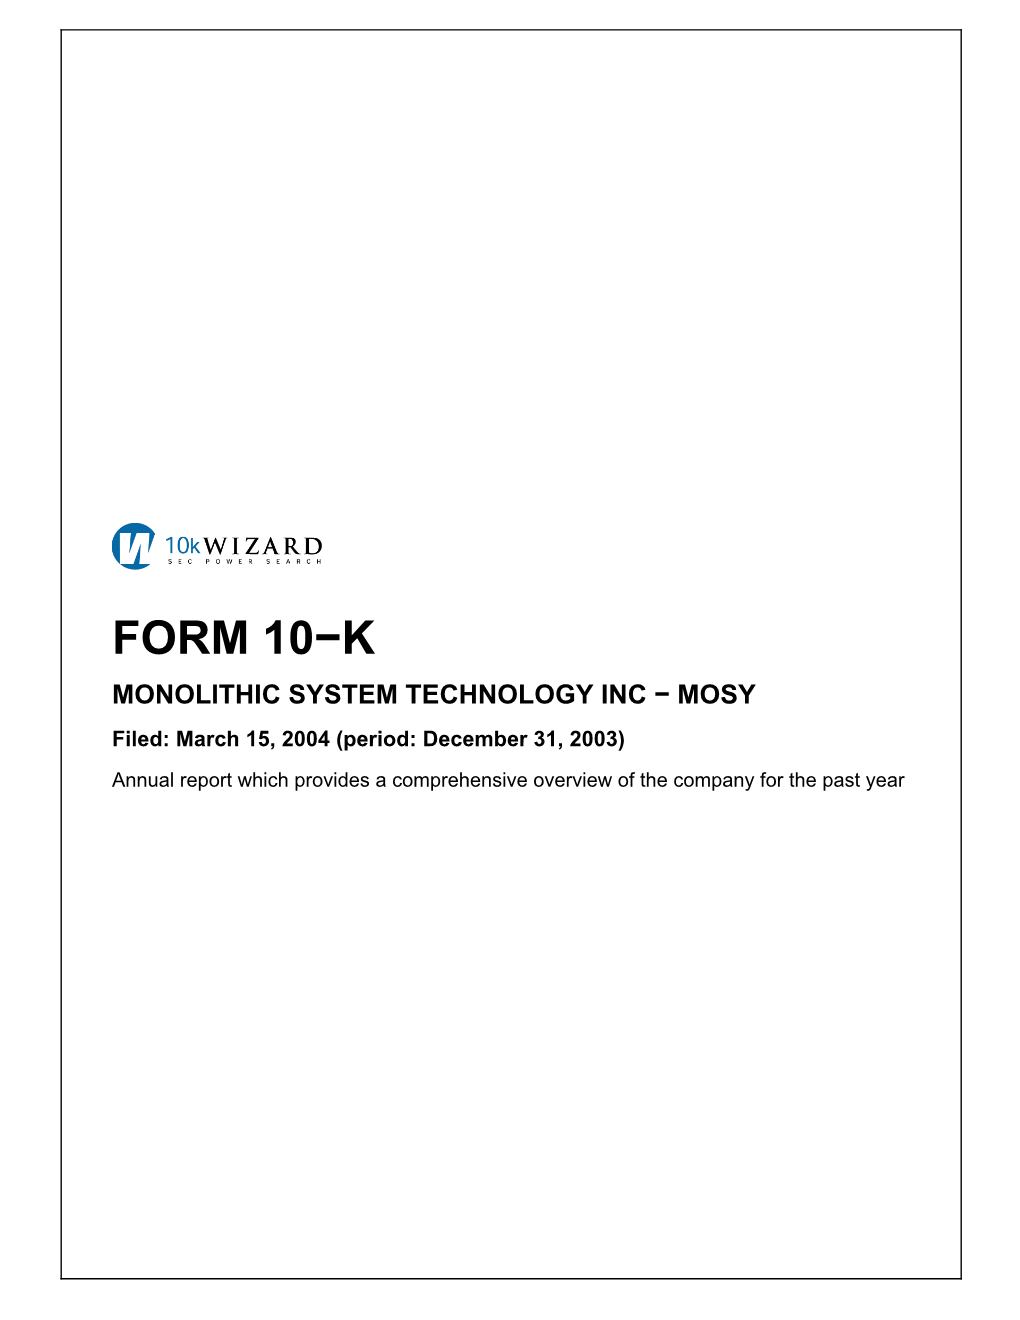 FORM 10−K MONOLITHIC SYSTEM TECHNOLOGY INC − MOSY Filed: March 15, 2004 (Period: December 31, 2003)